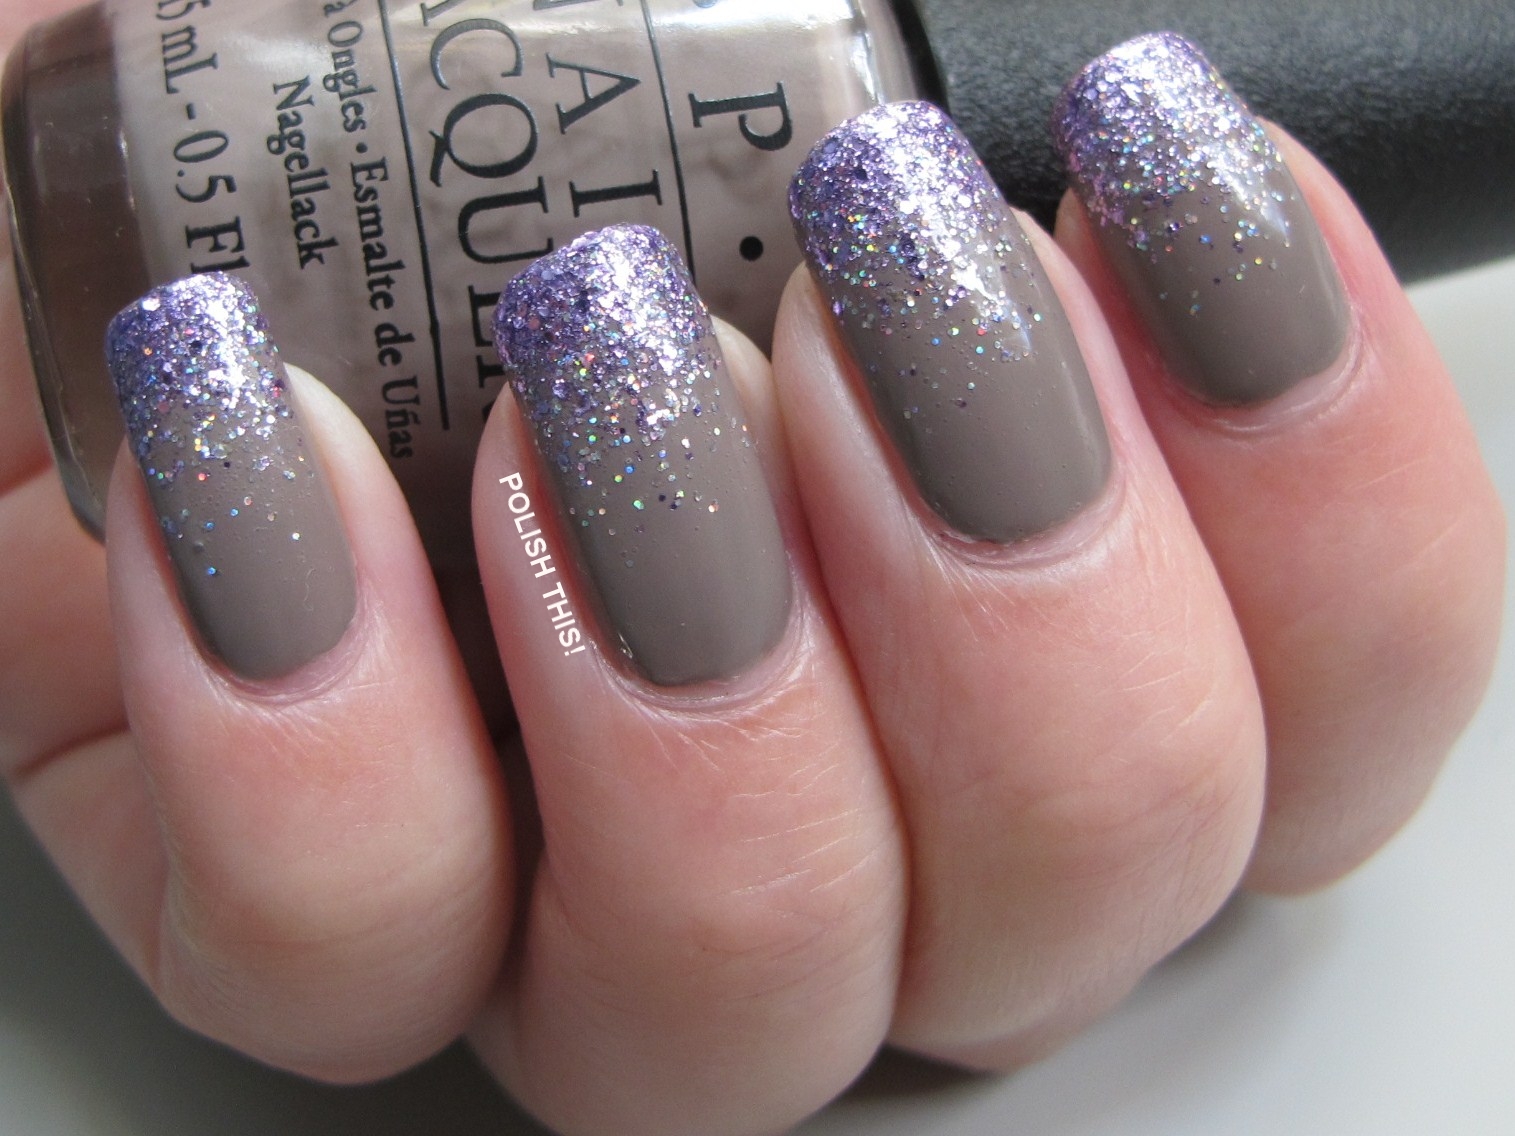 2. OPI Nail Lacquer in "Berlin There Done That" - wide 1